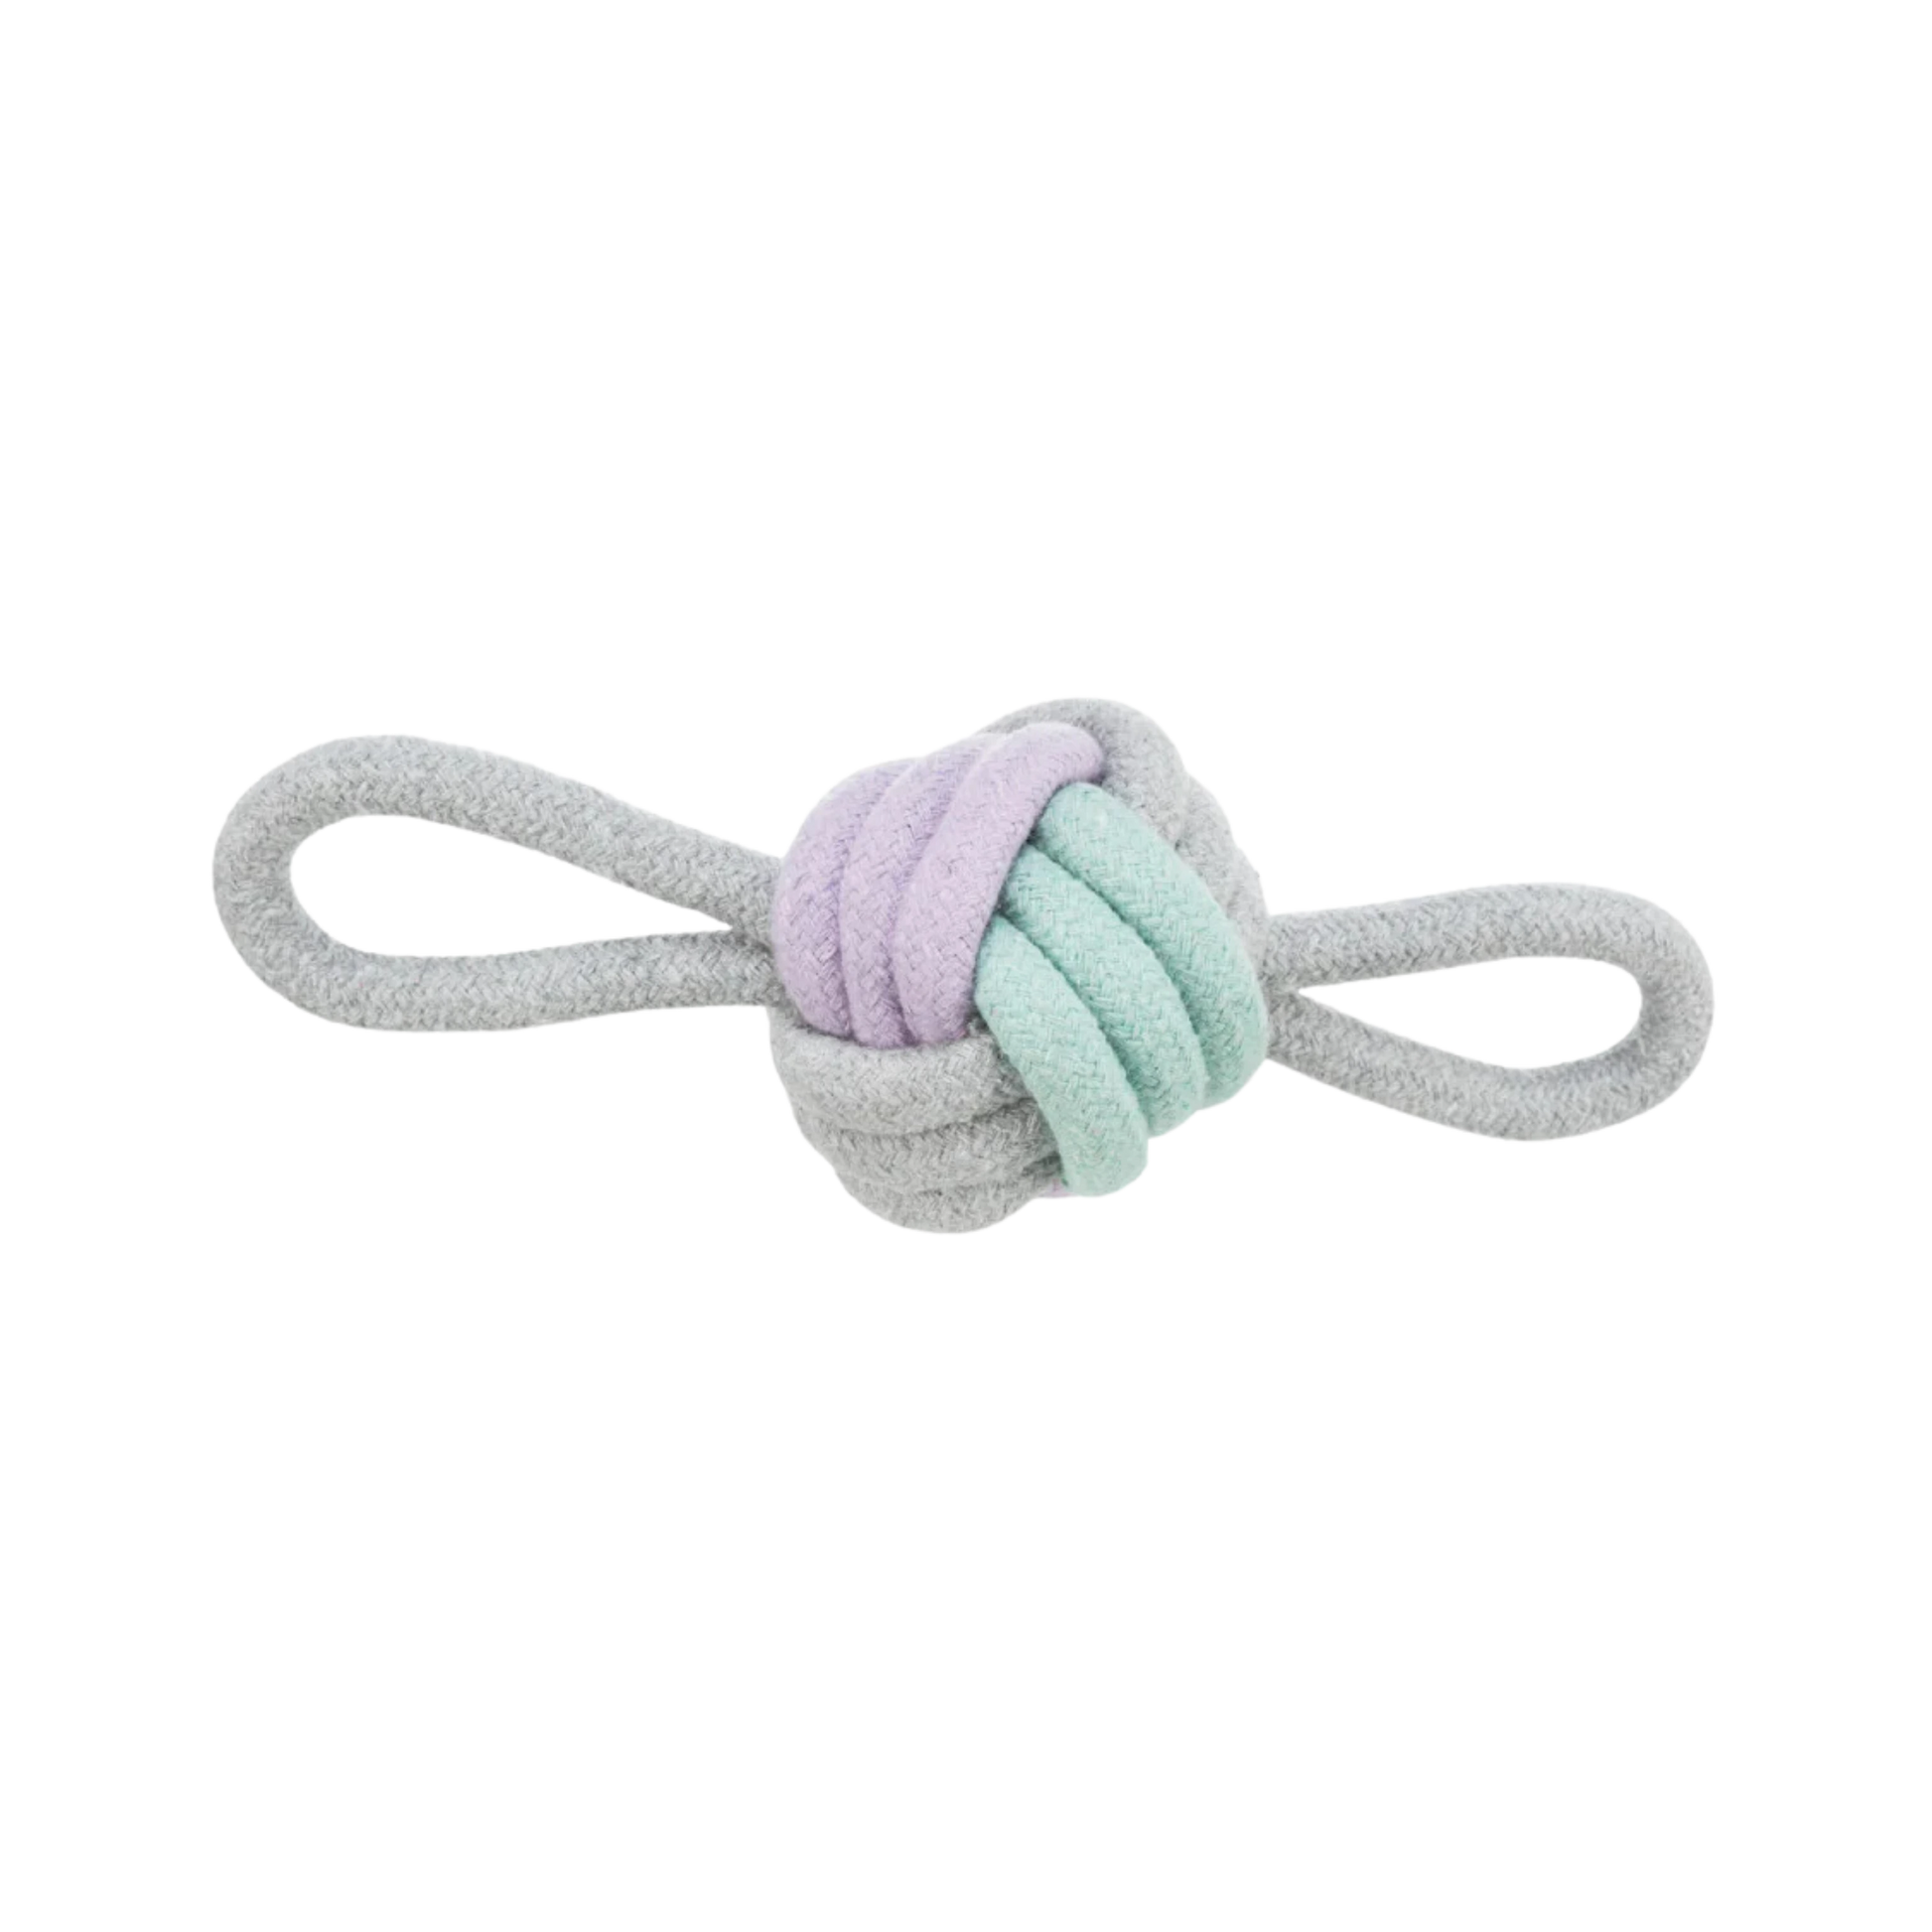 TRIXIE JUNIOR KNOTTED BALL WITH LOOPS 1PC